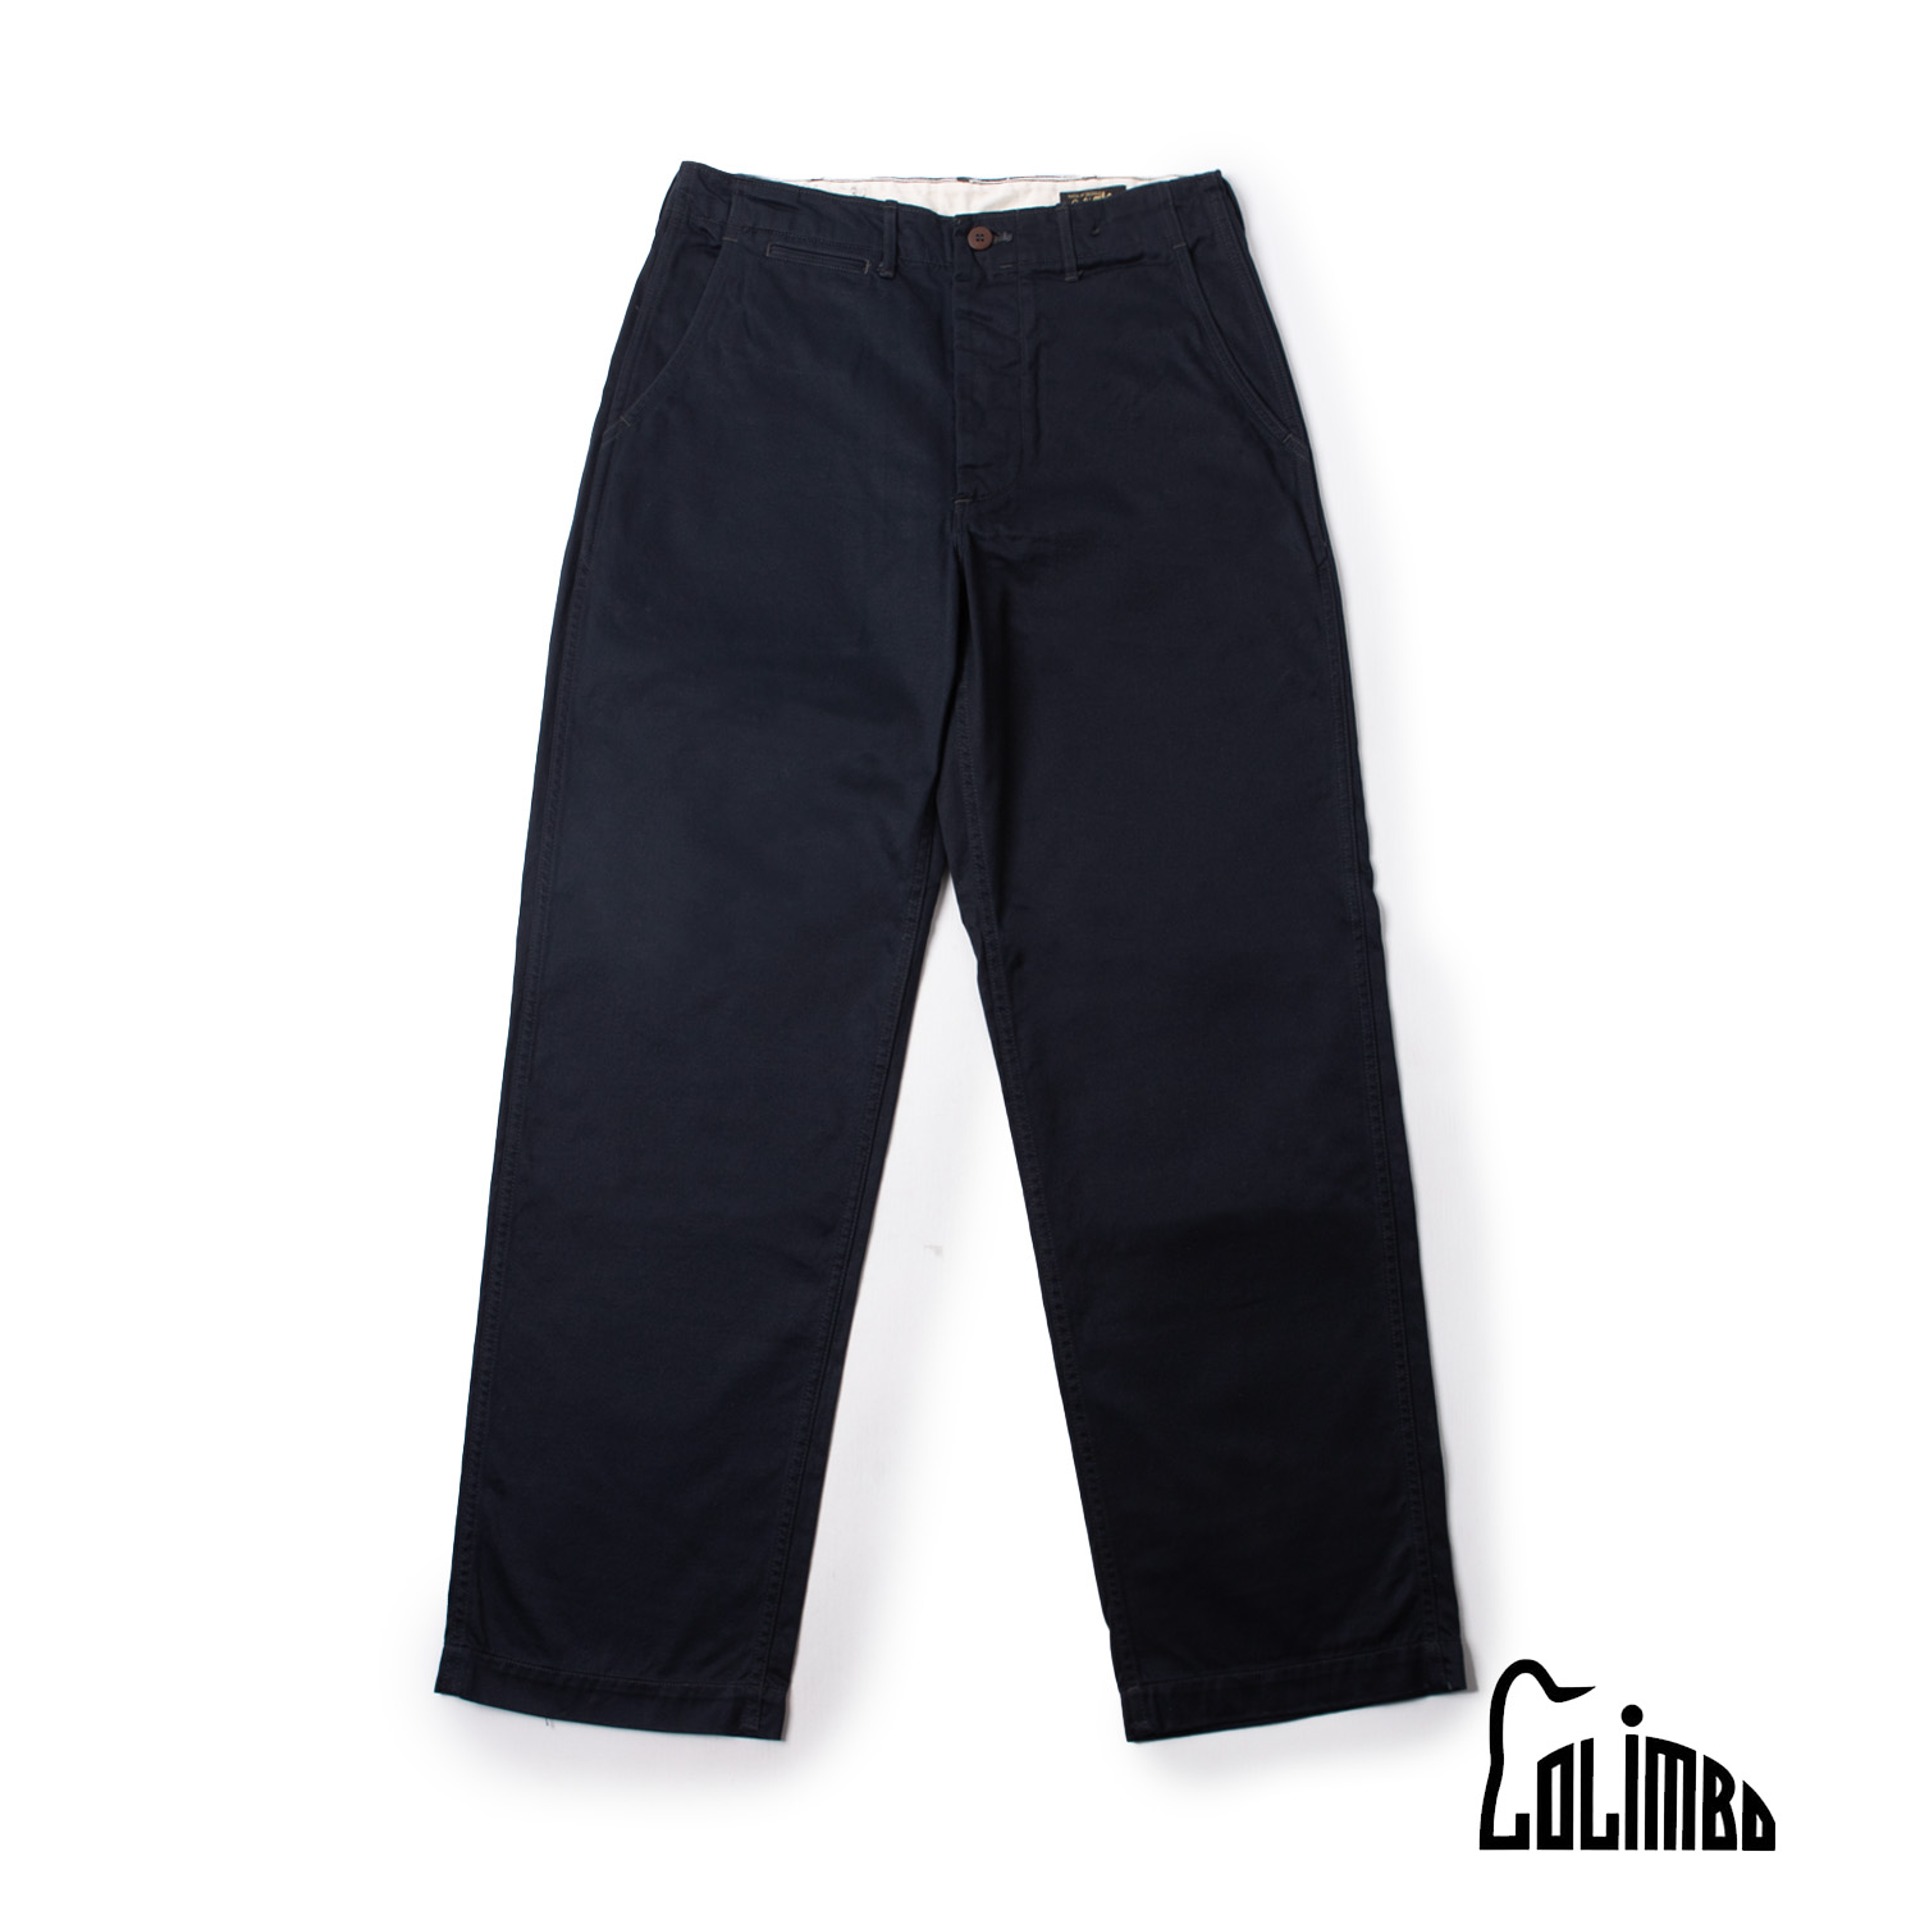 WEST-POINT CLOTH   OVERLAND CAMPAIGN TROUSERS  (Dark navy)